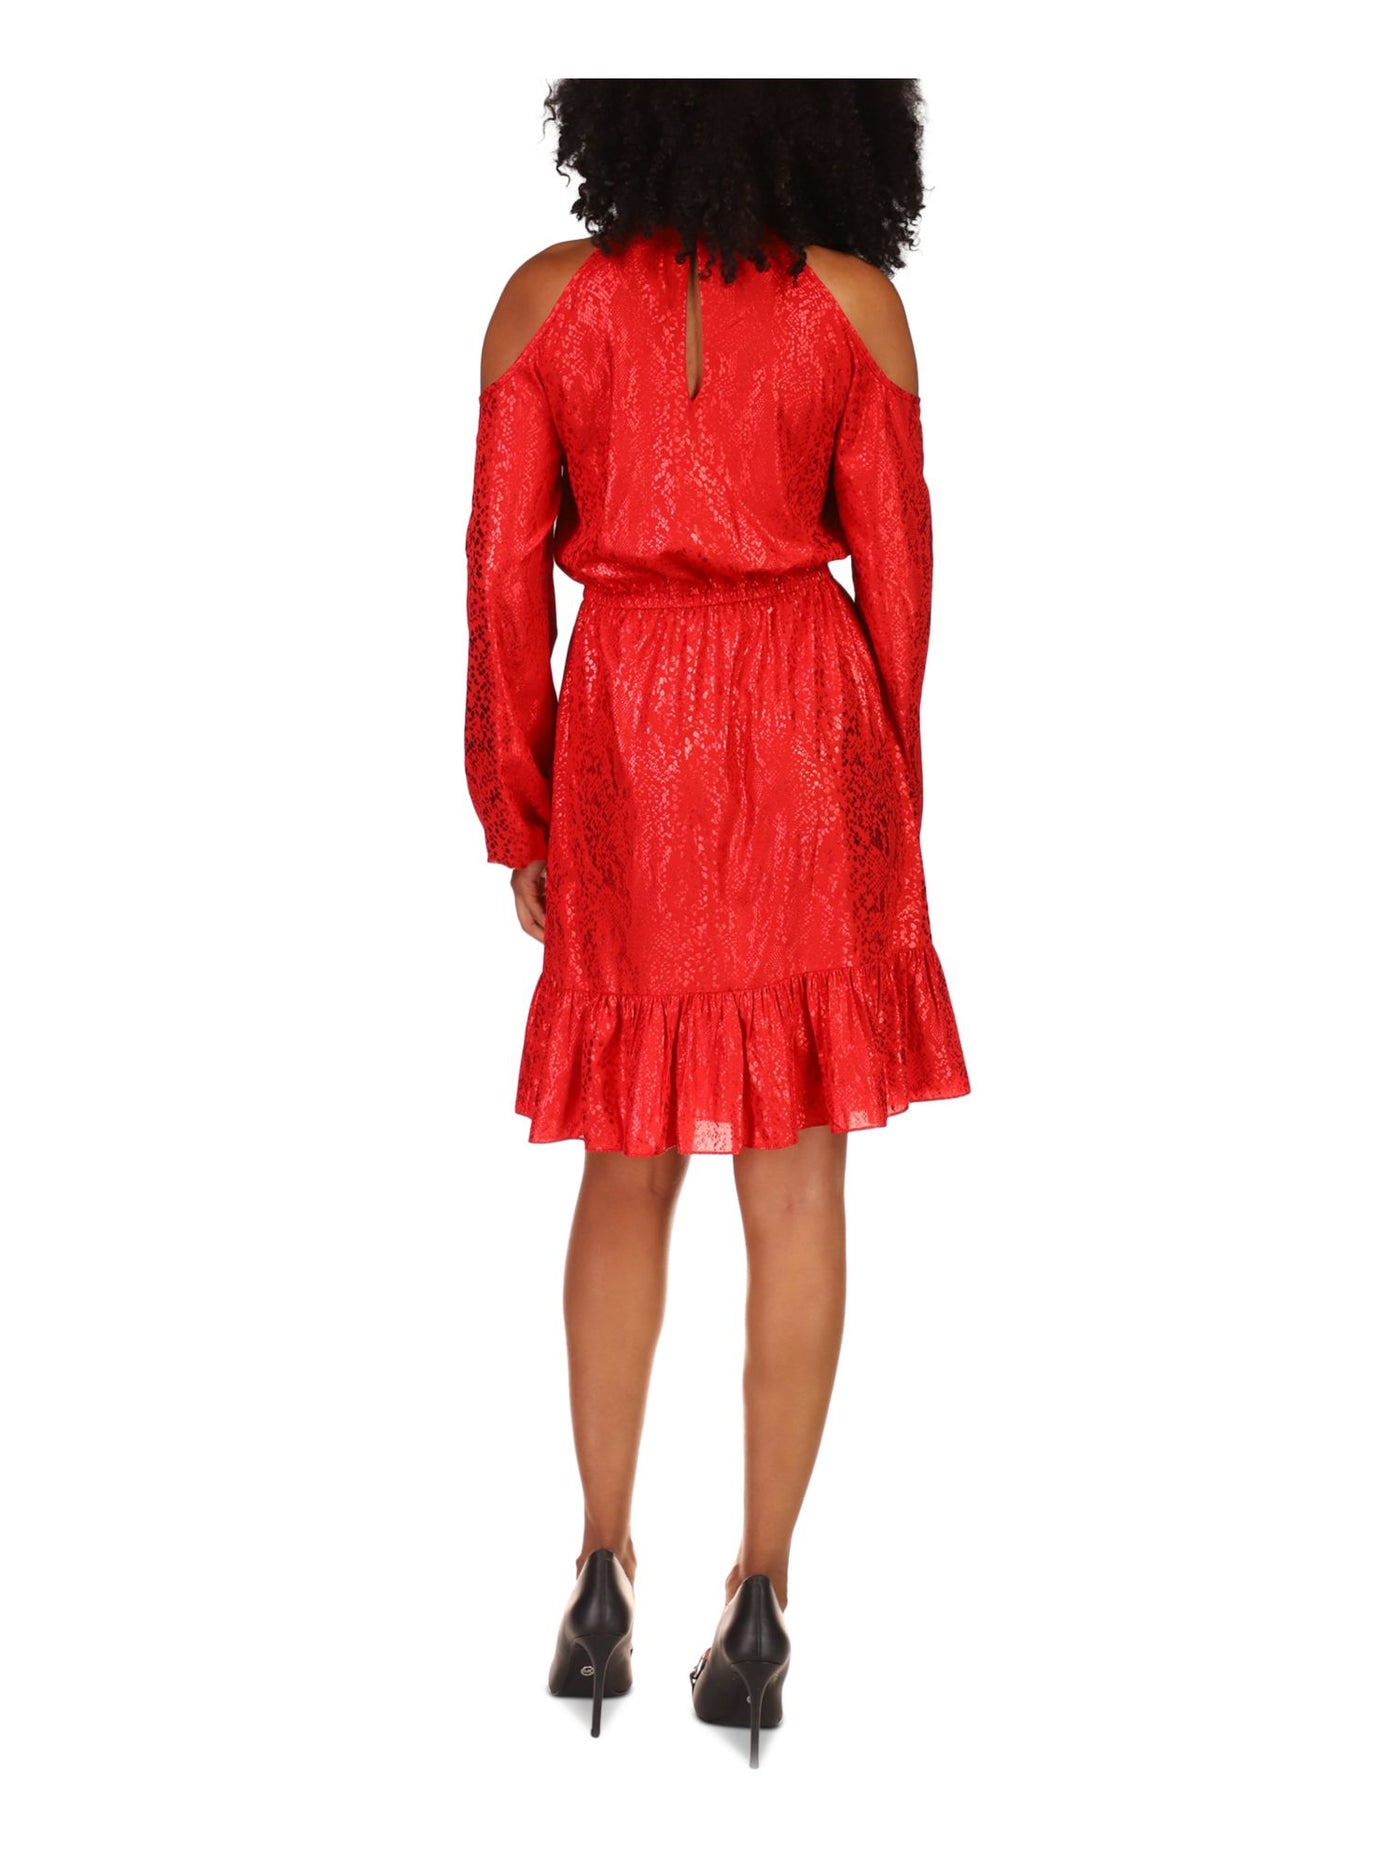 MICHAEL KORS Womens Red Printed Long Sleeve Halter Above The Knee Evening Ruffled Dress Petites PXS